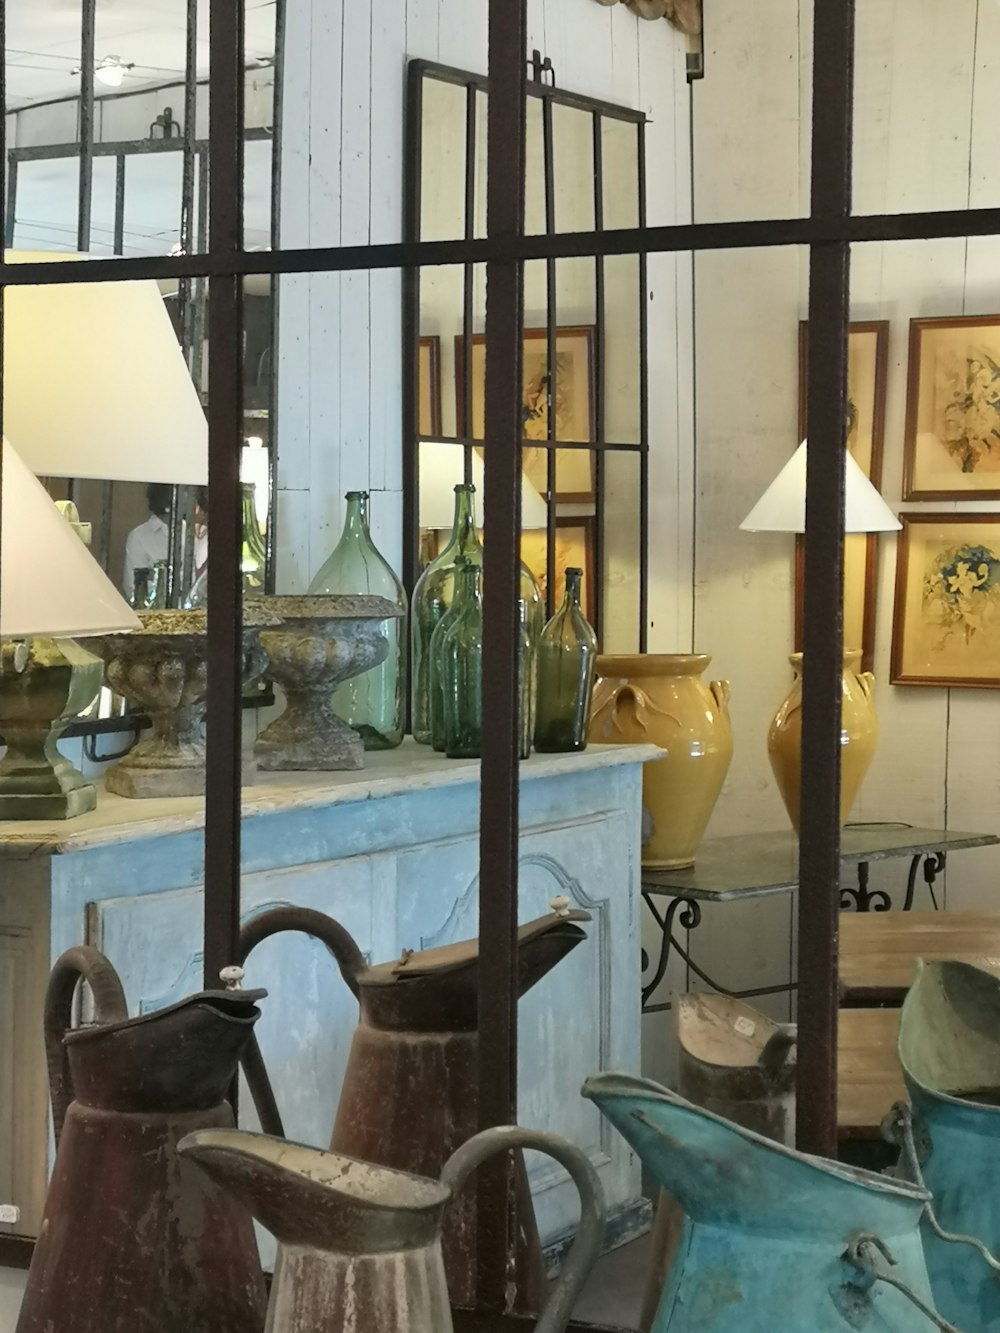 Trading antiques has become an area of interest for many in recent years. #antiques 